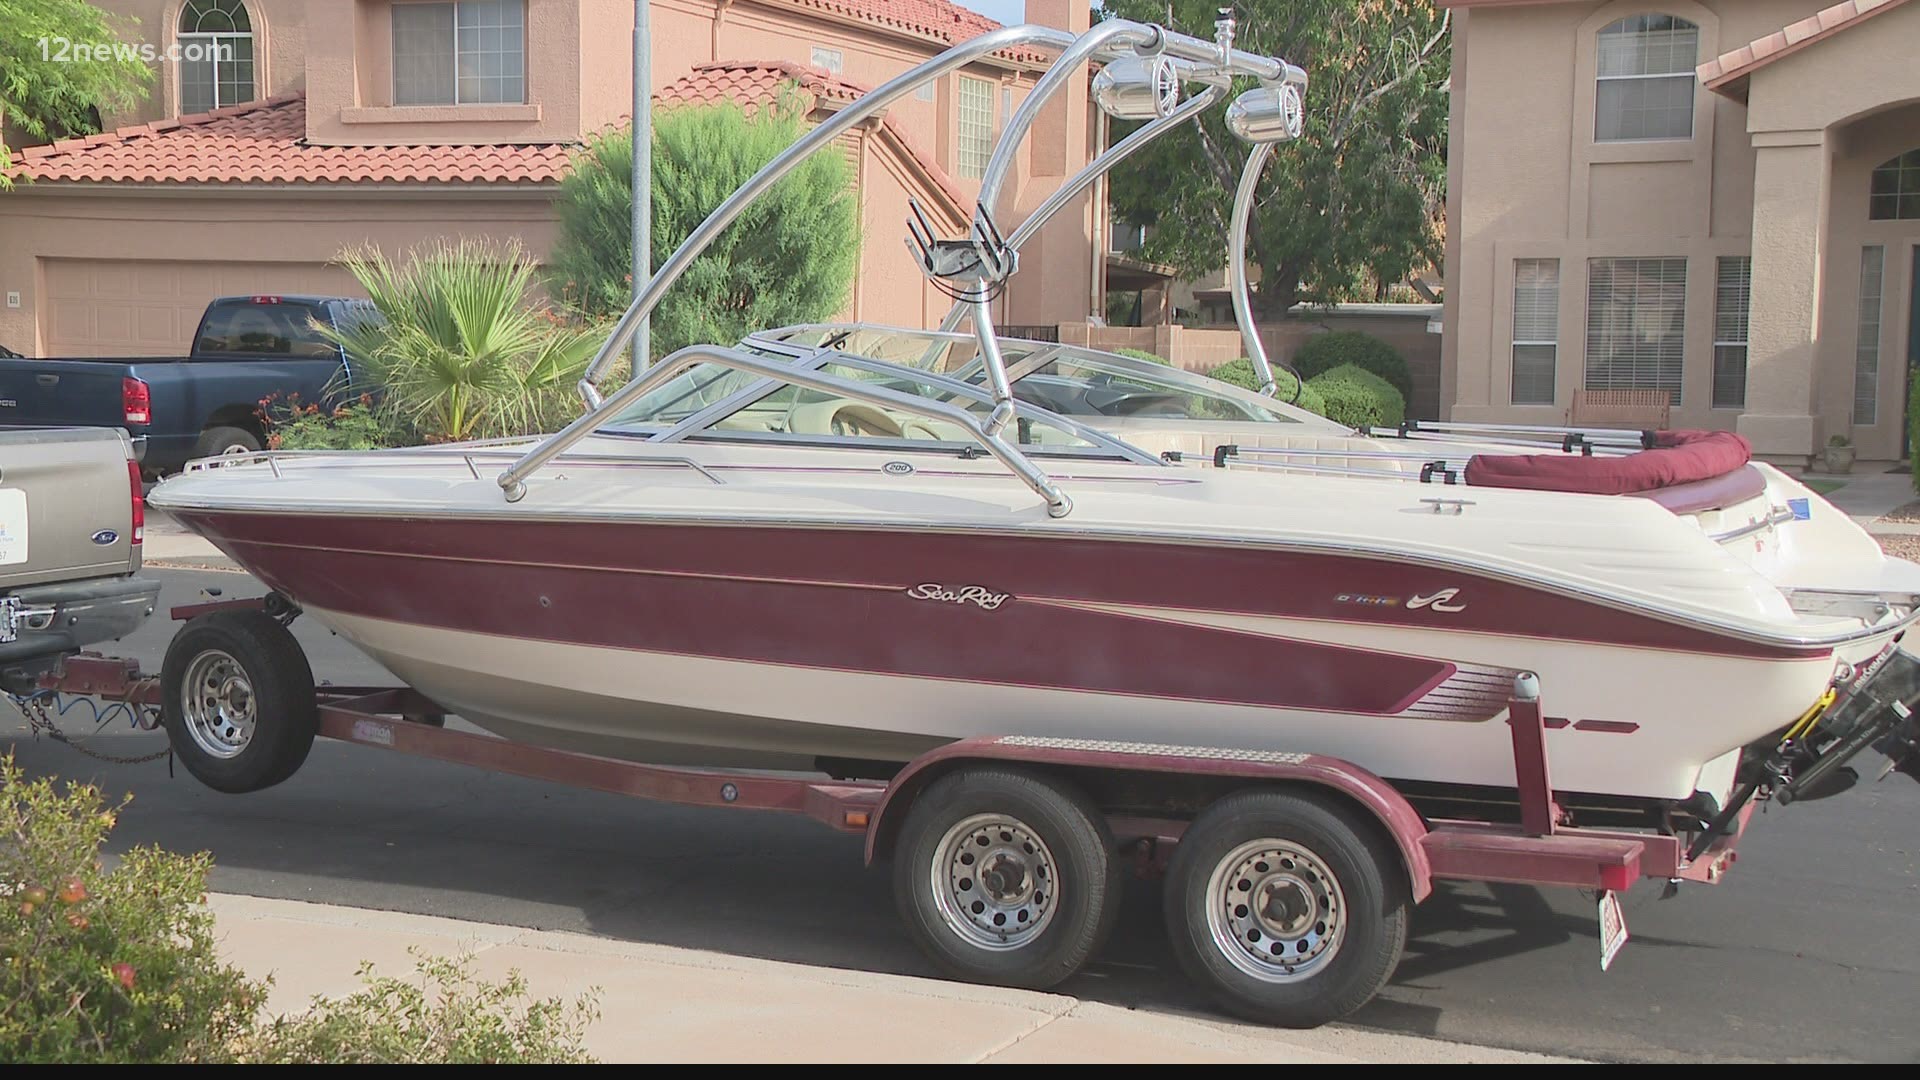 With the help of neighbors, social media and an alert Tempe cop, a Valley family’s boat is back and the suspect is behind bars.